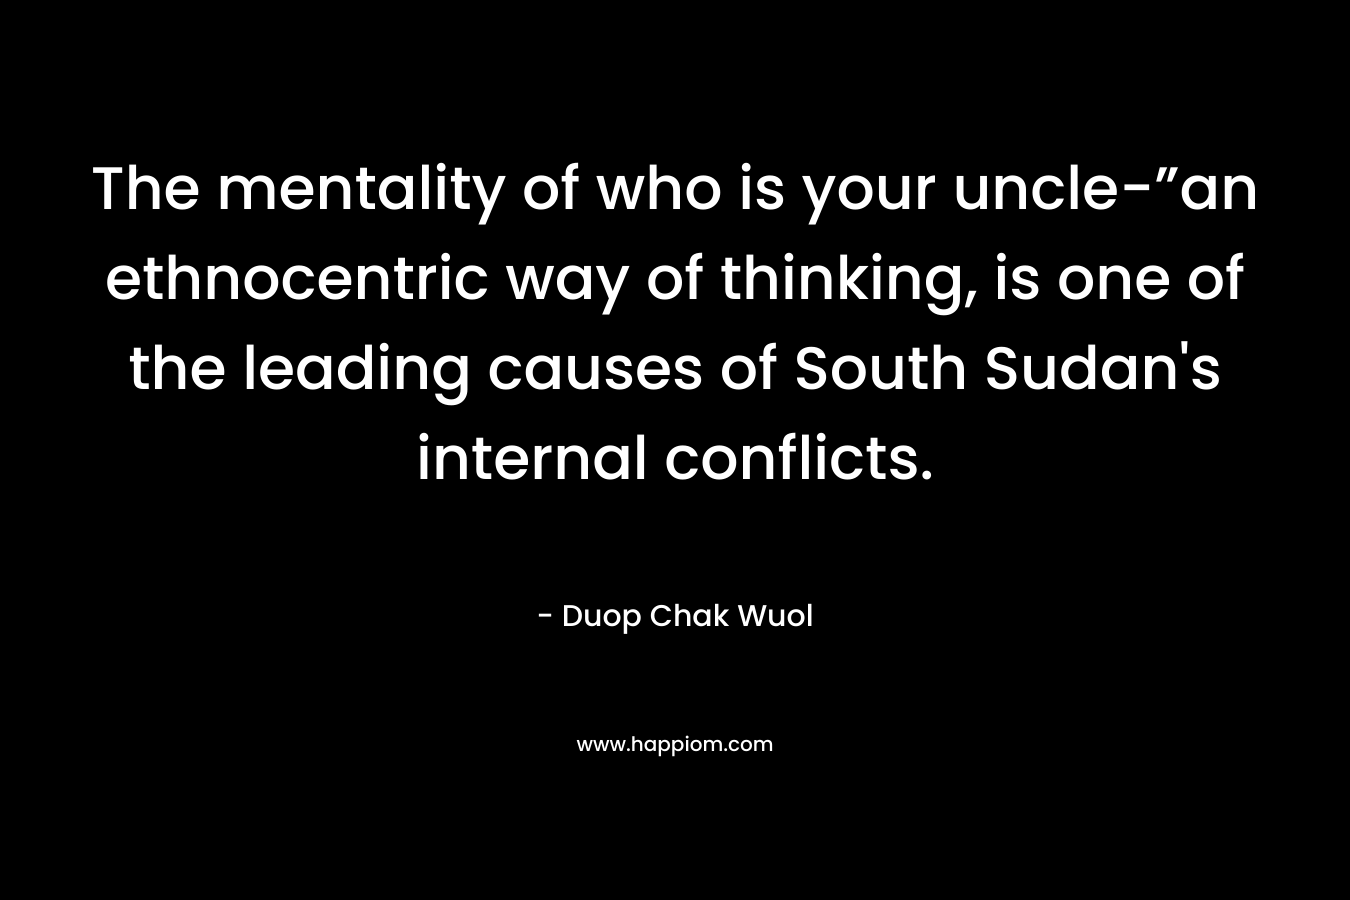 The mentality of who is your uncle-”an ethnocentric way of thinking, is one of the leading causes of South Sudan’s internal conflicts. – Duop Chak Wuol